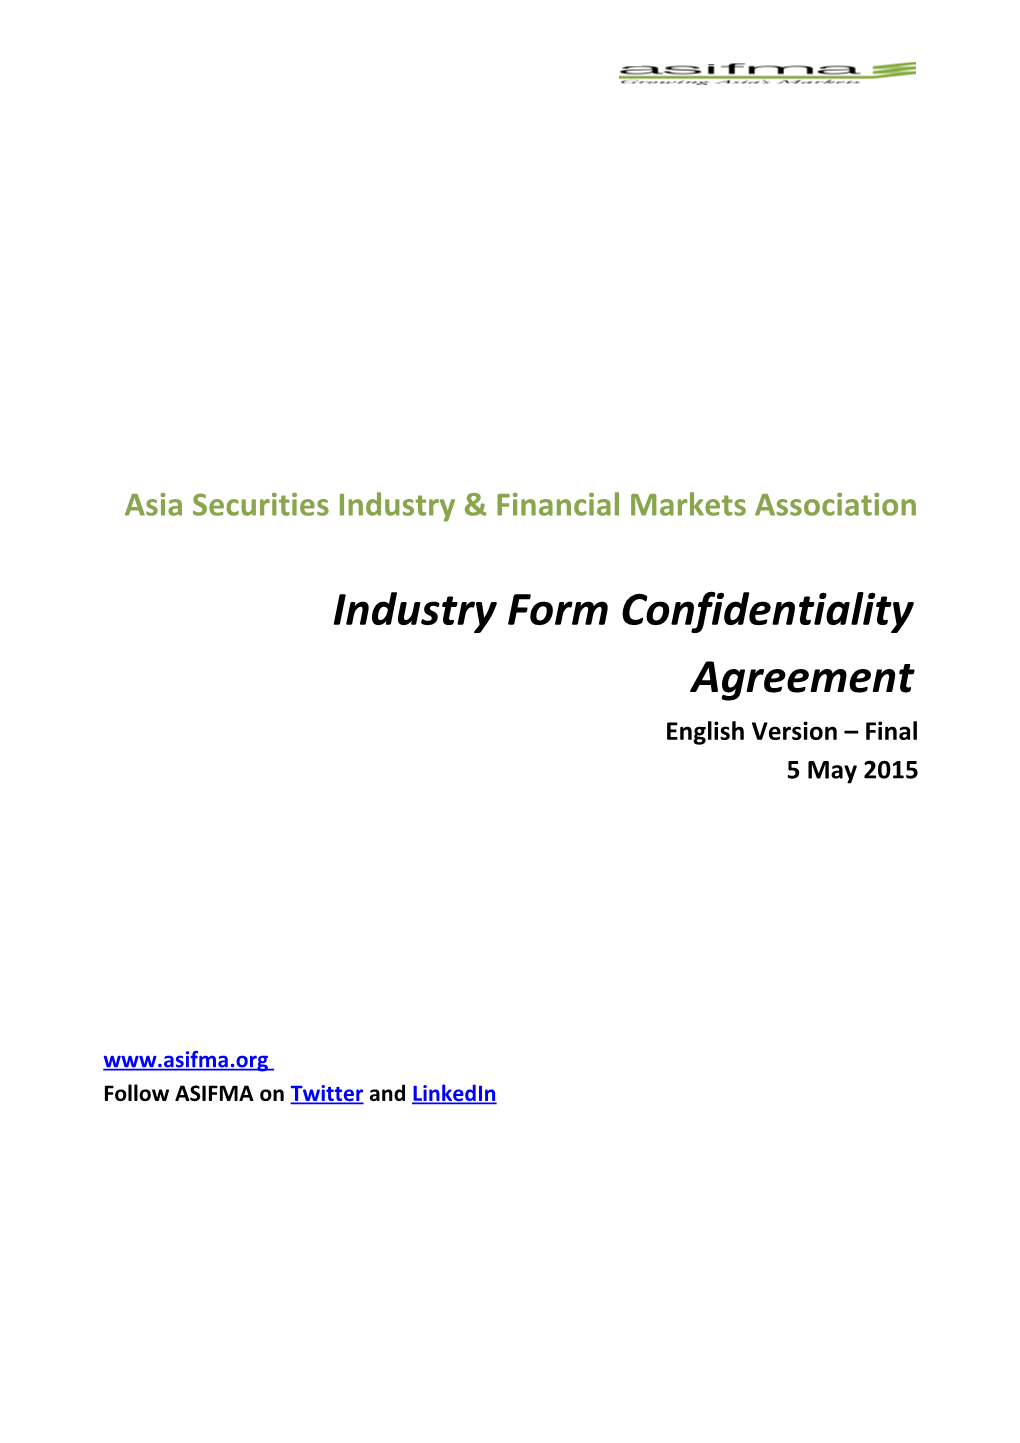 Industry Form Confidentiality Agreement